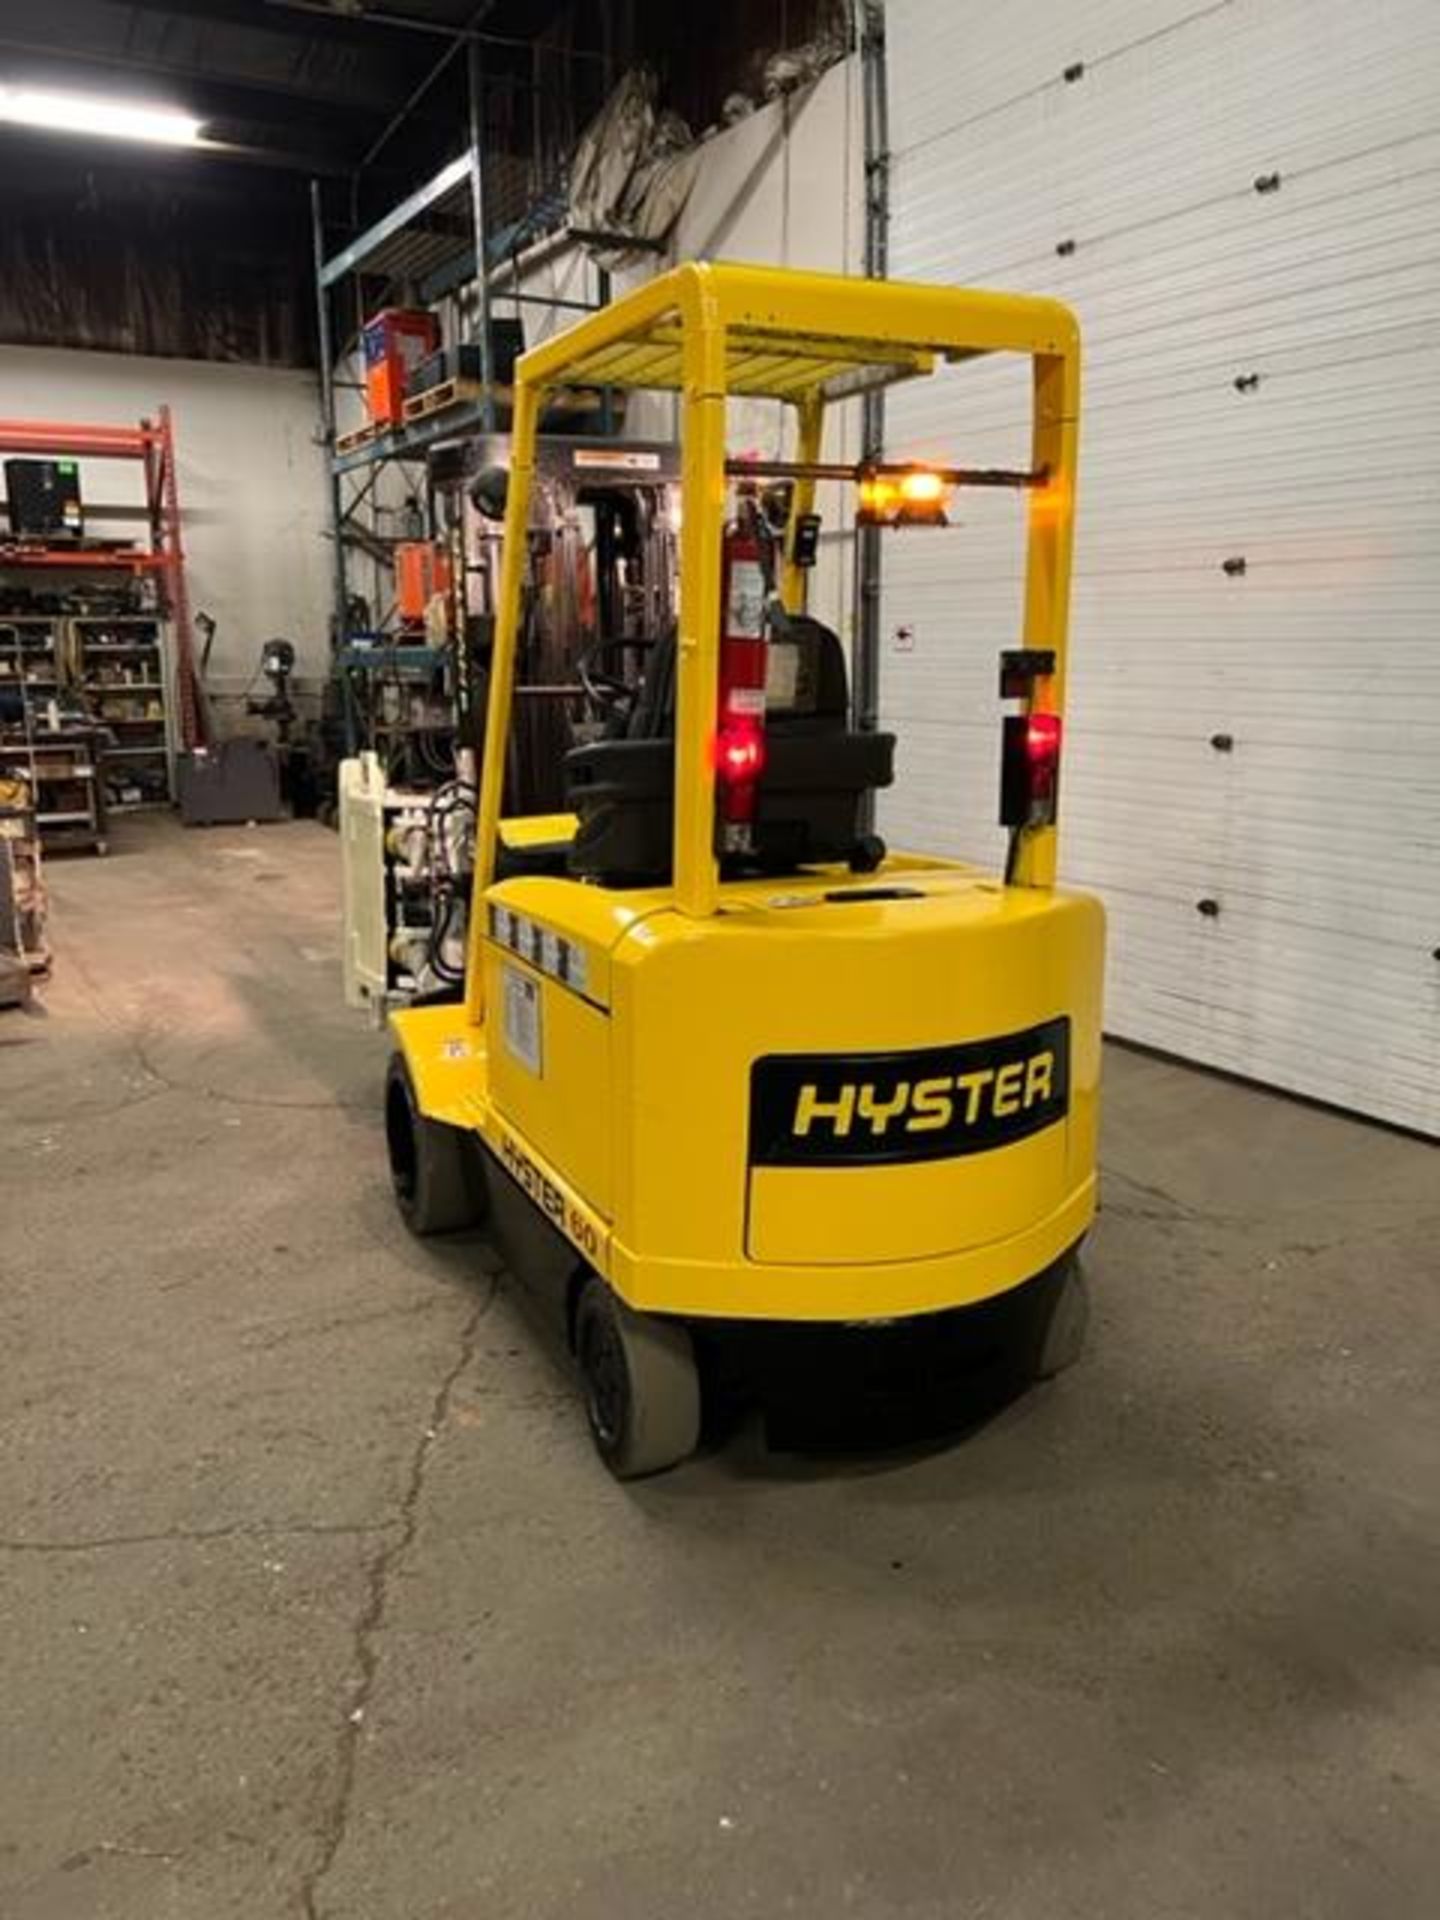 FREE CUSTOMS - NICE Hyster model 60 - 6,000lbs Capacity Forklift Electric with Cascade Grapple - Image 3 of 3